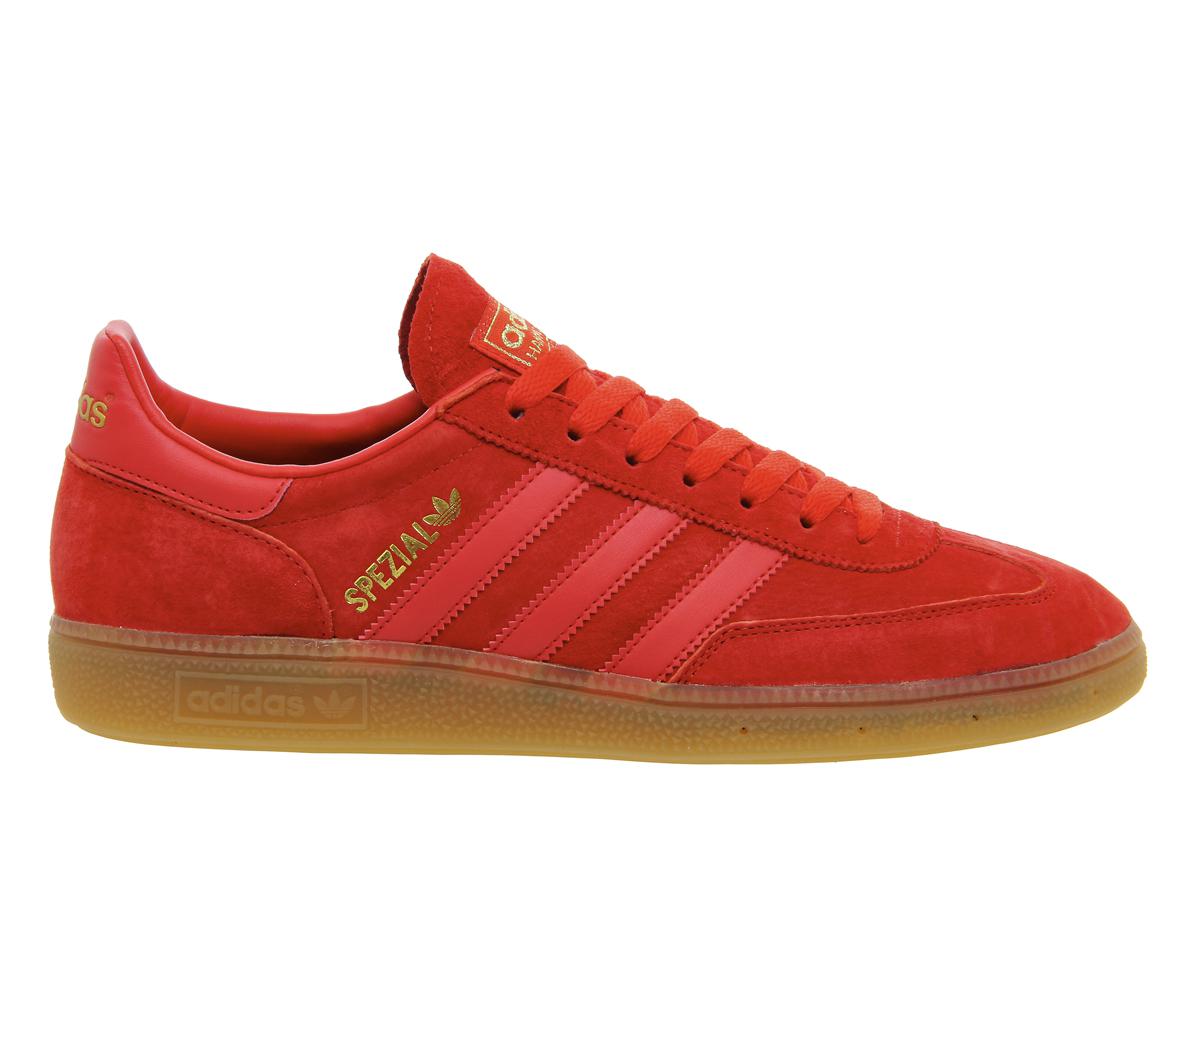 adidas spezial black and red